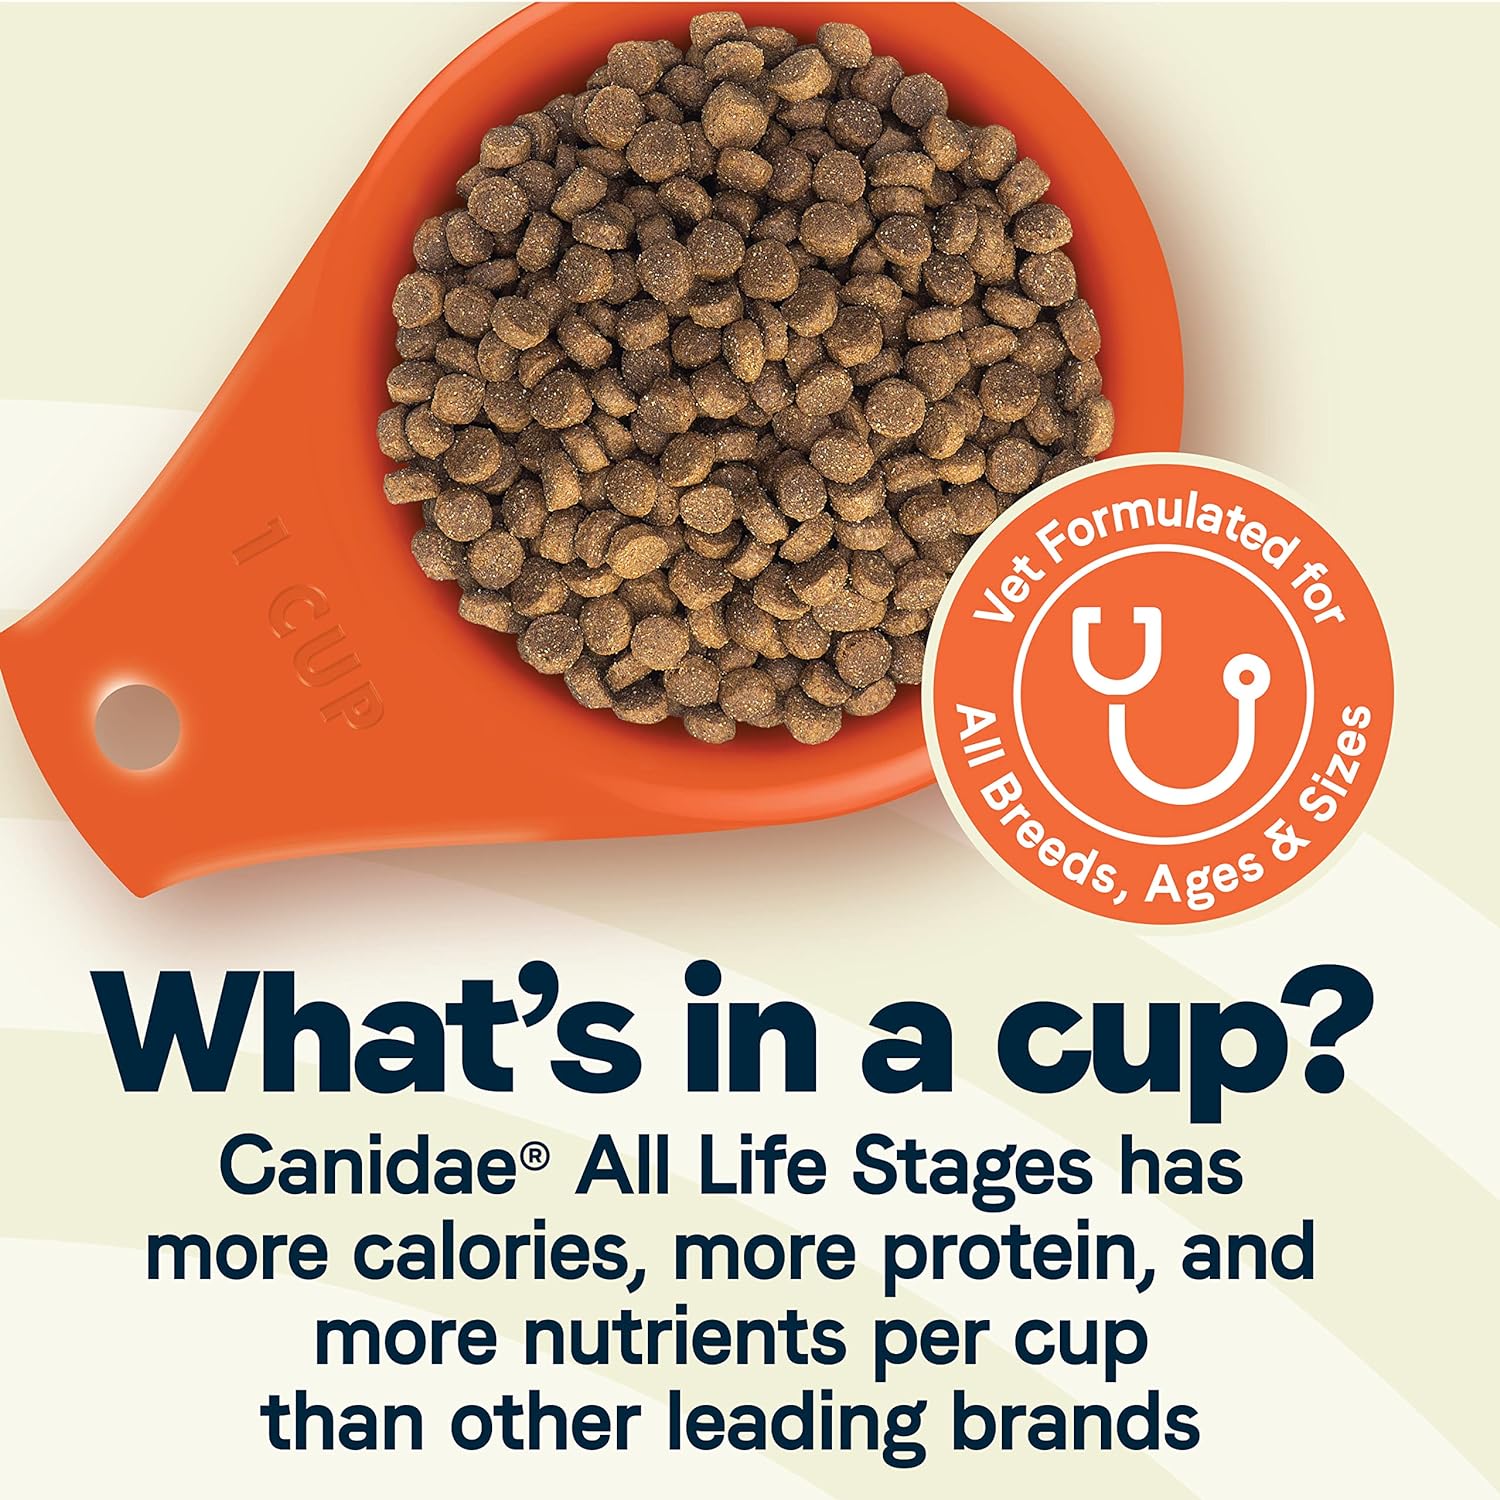 Canidae All Life Stages Less Active Formula Canidae Platinum Chicken, Turkey, Lamb, & Fish Meals Dry Dog Food – Gallery Image 4